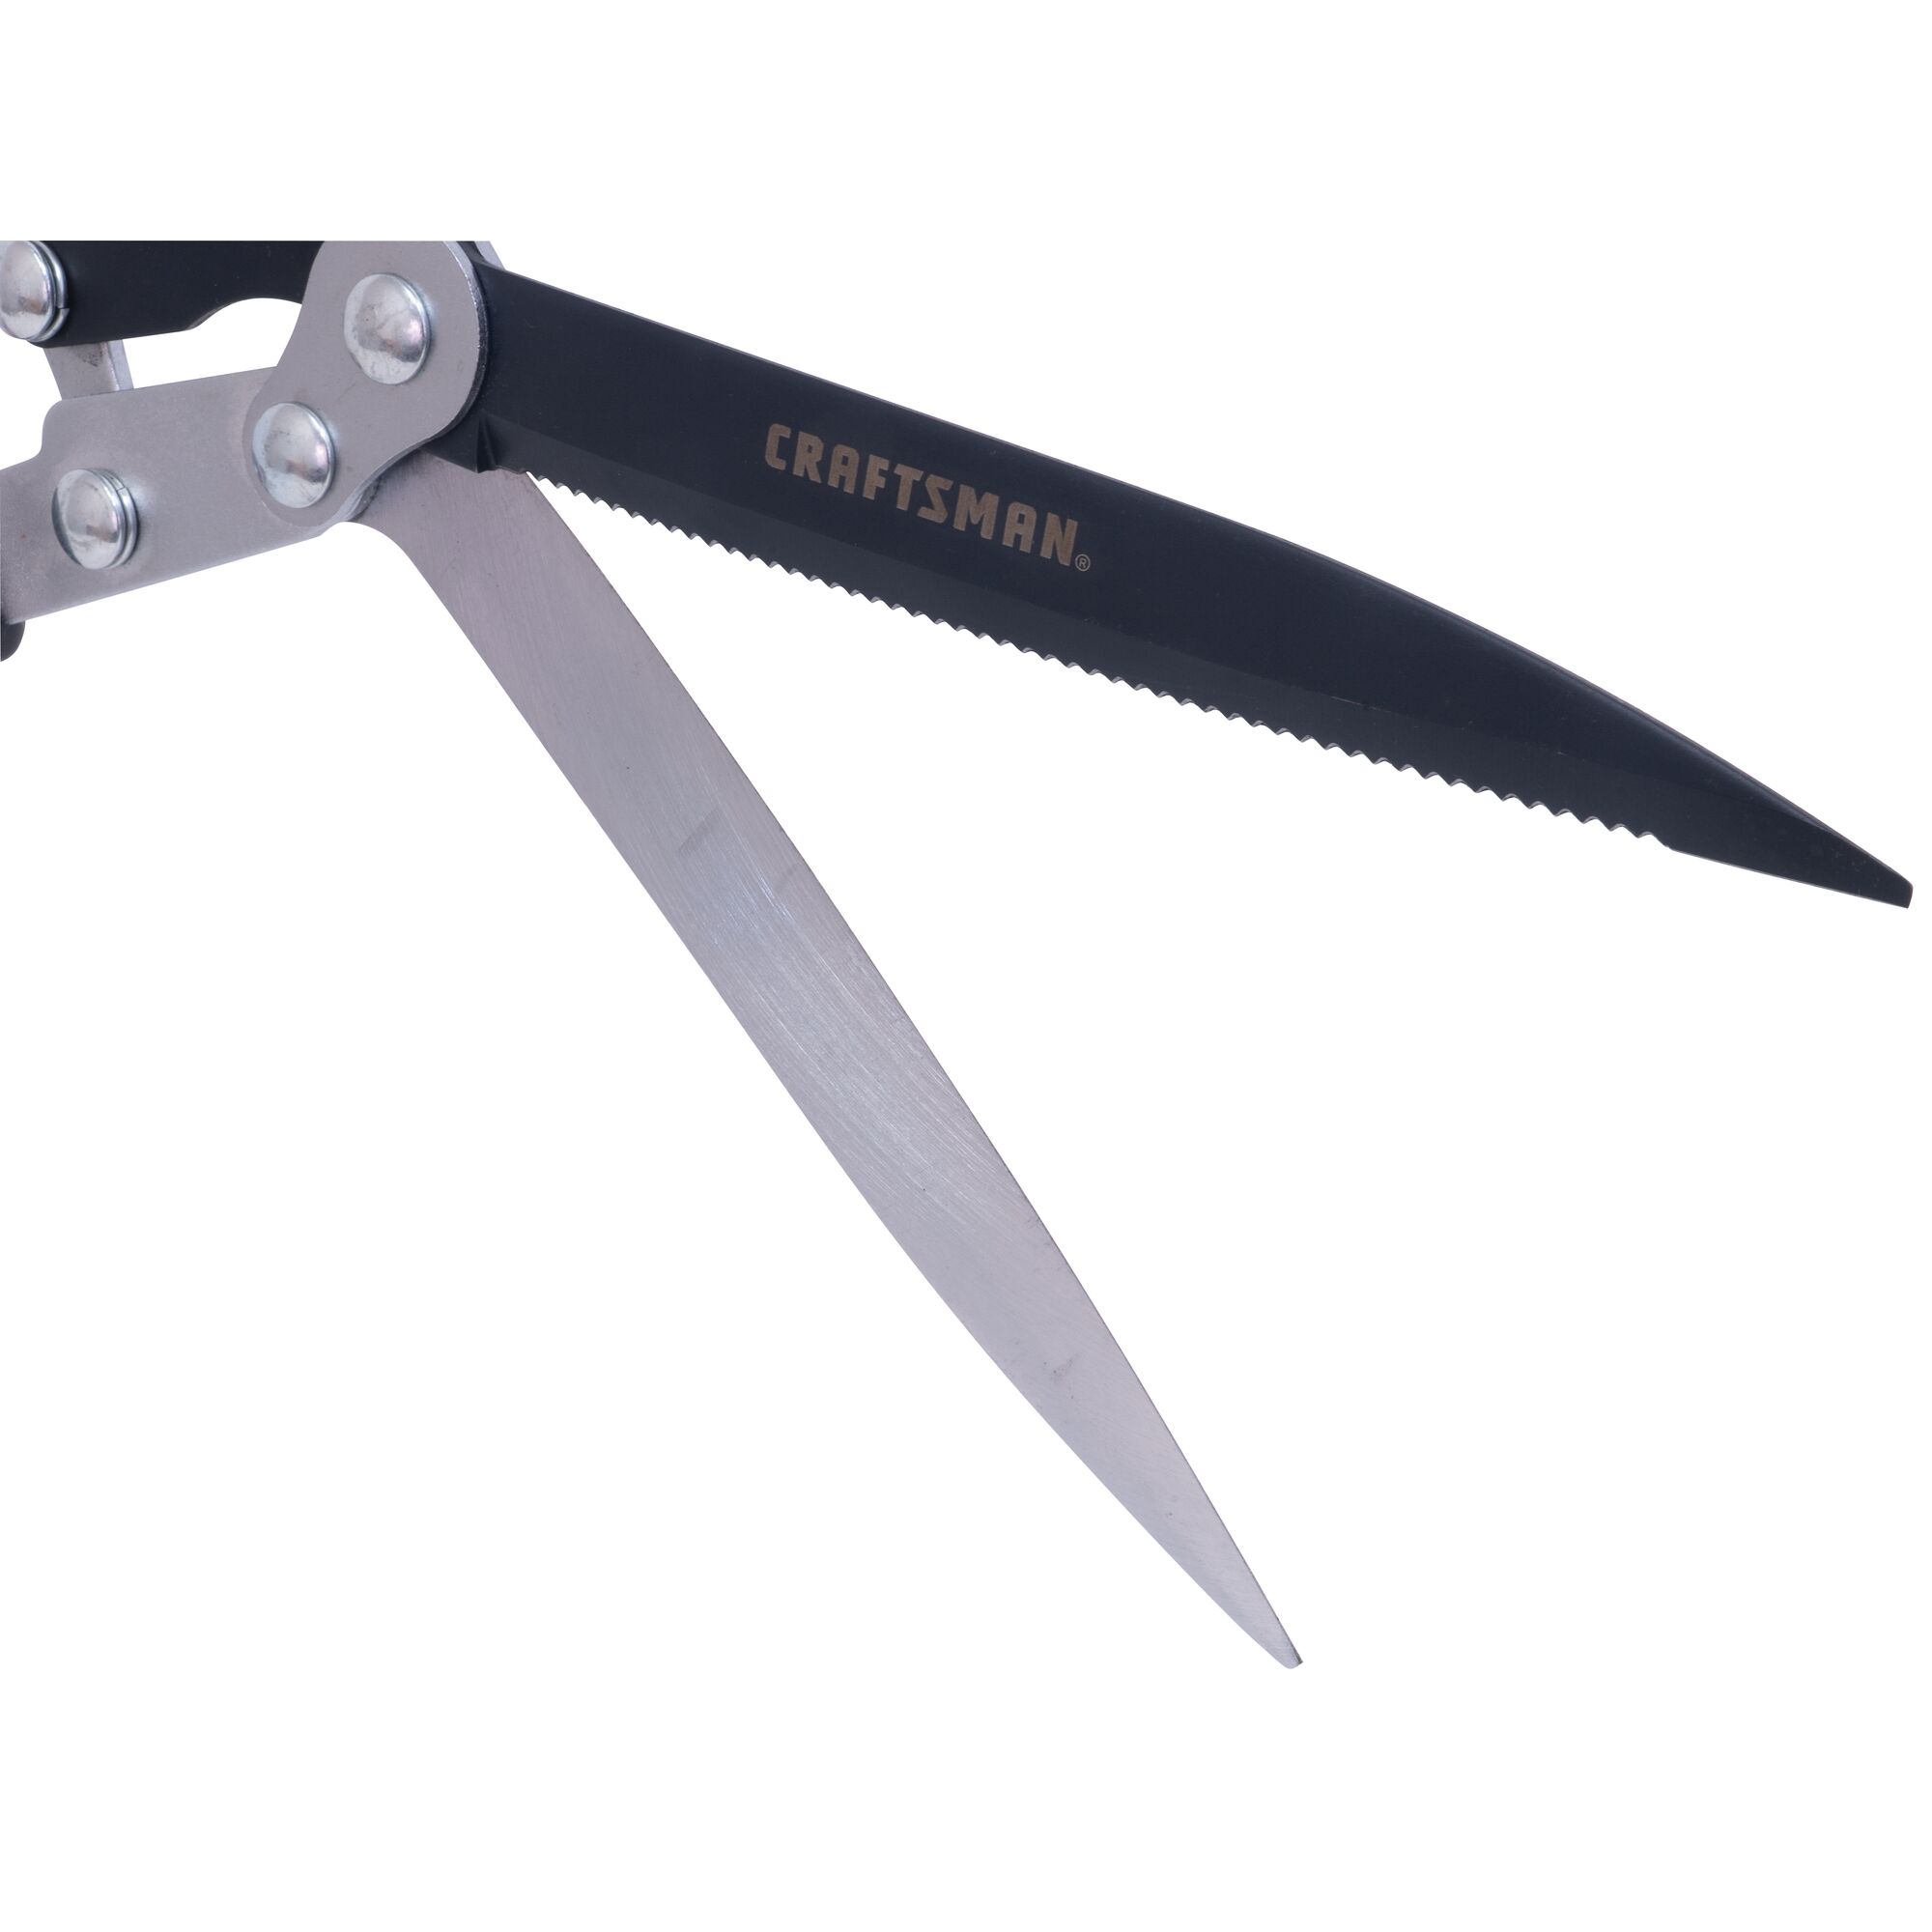 Non-stick blade coating feature of hedge shears with compound action blade.